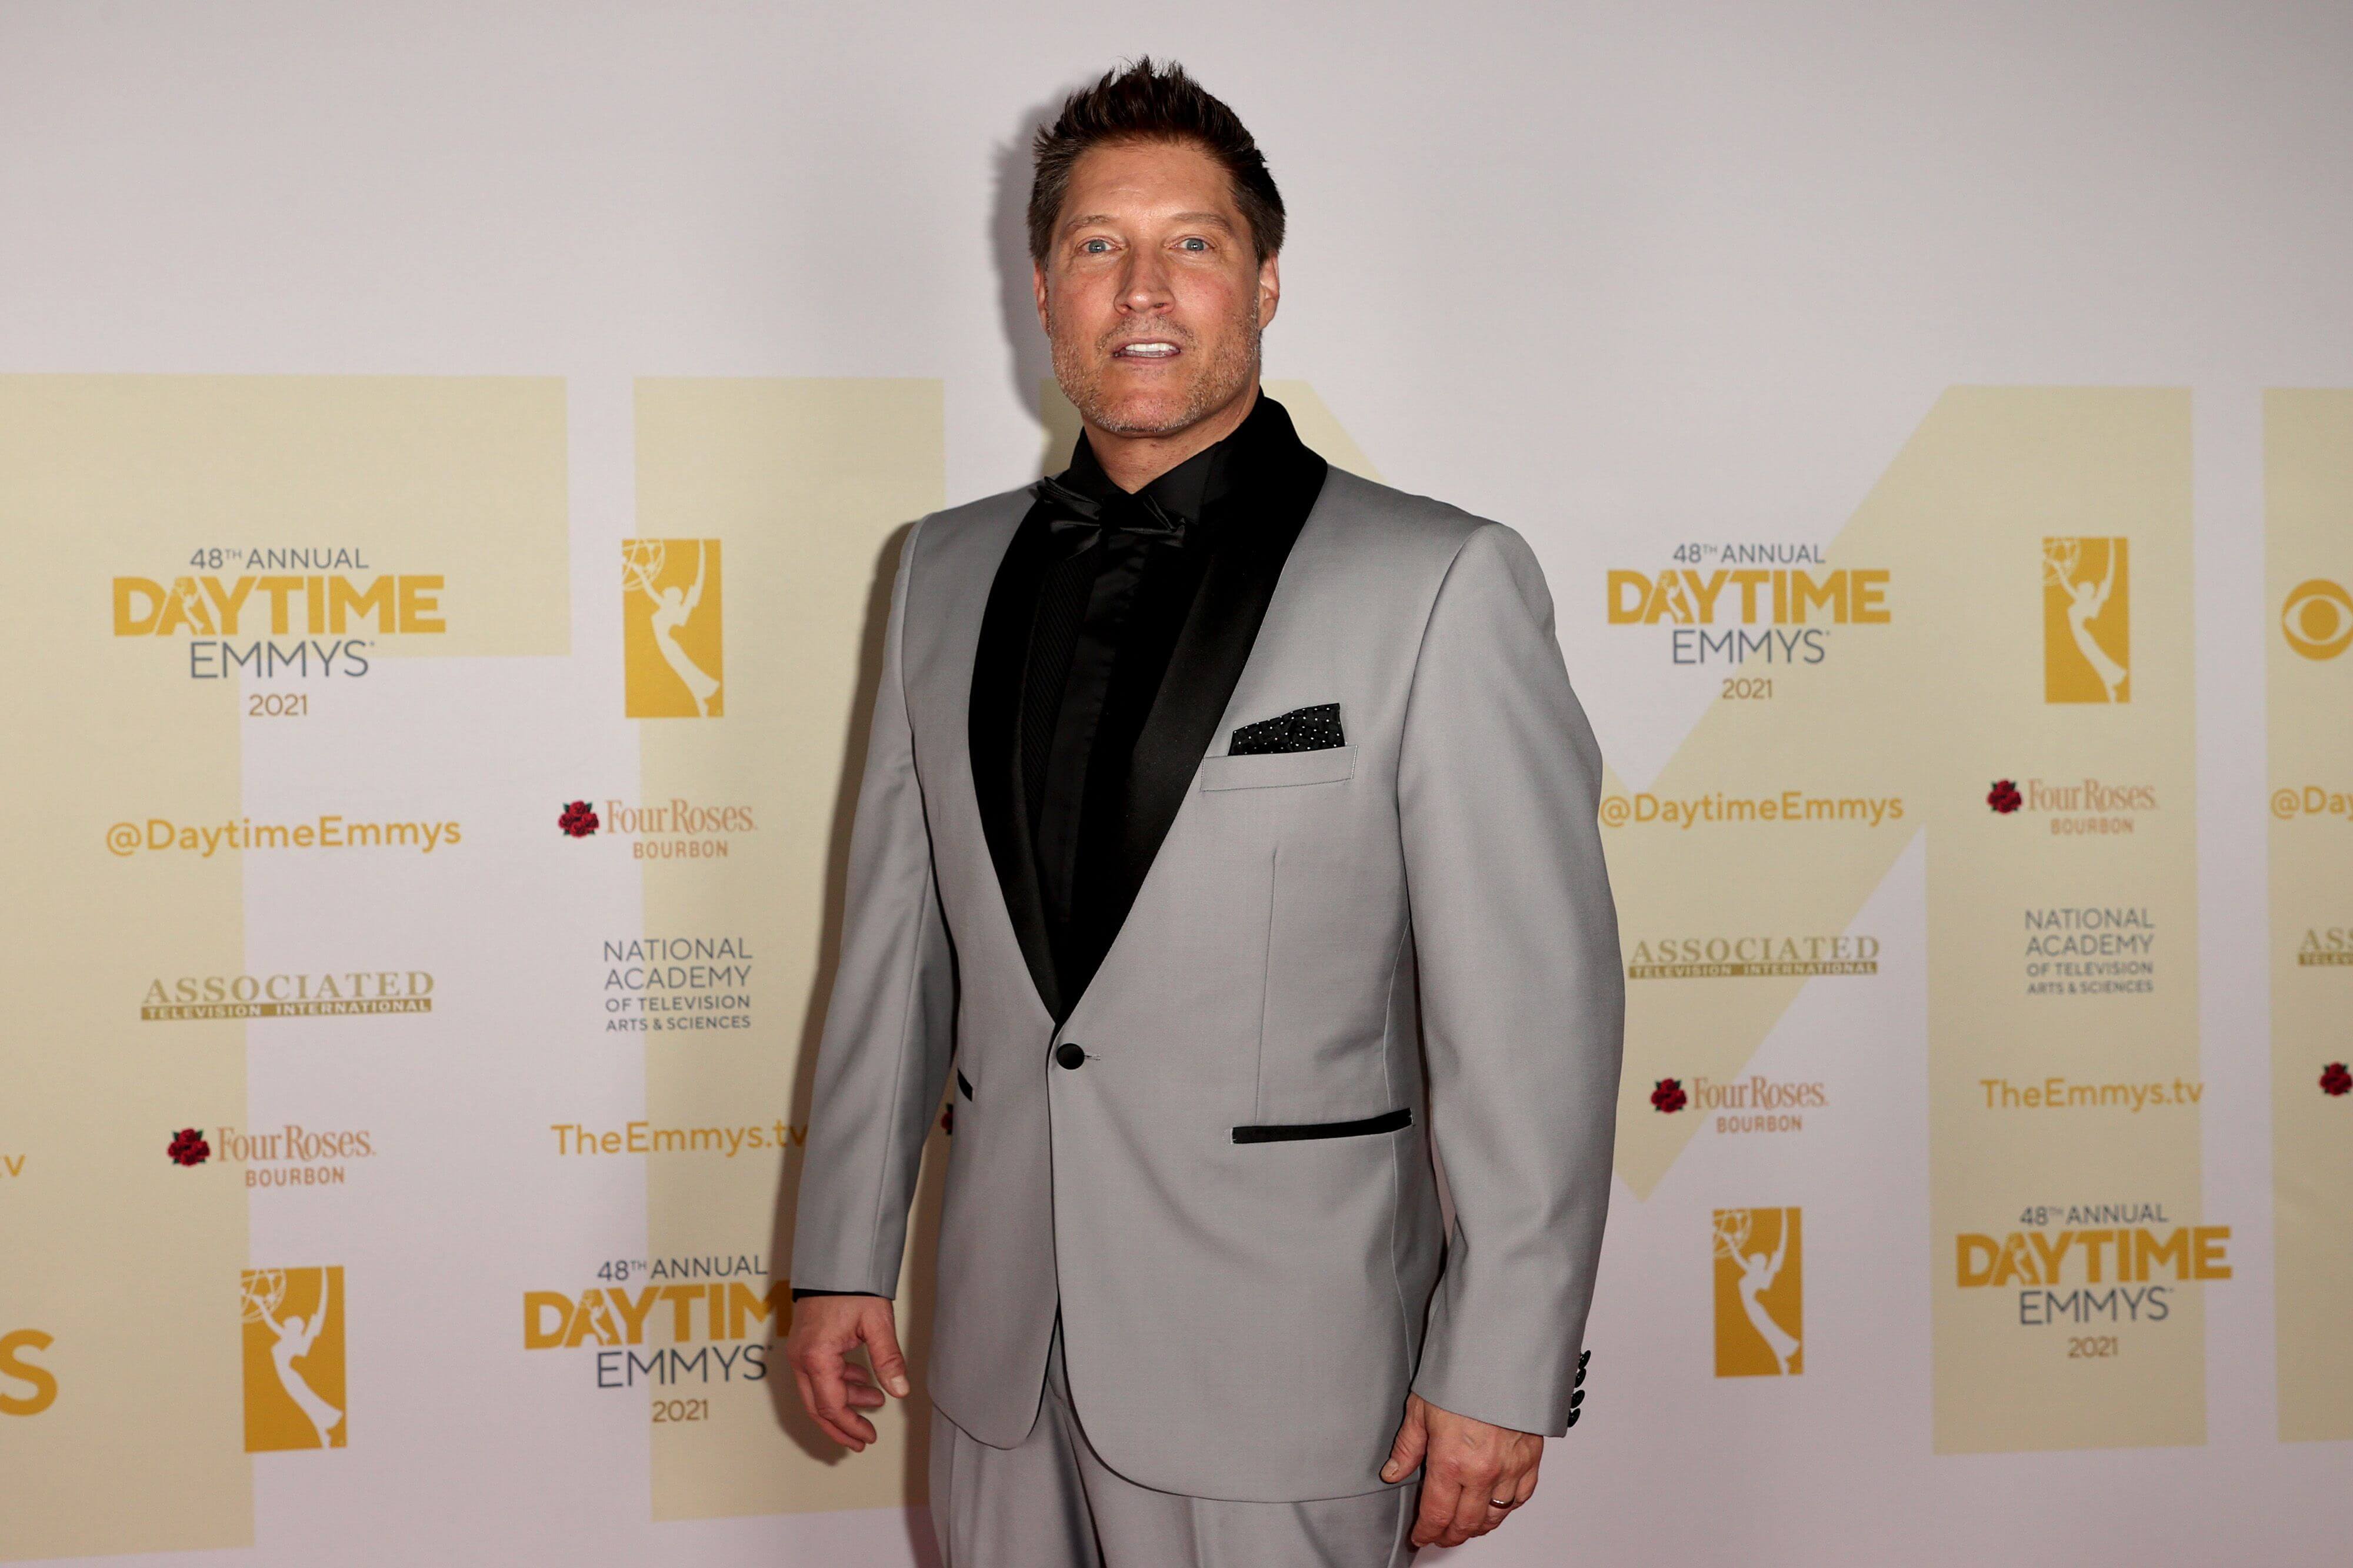 'The Bold and the Beautiful' star Sean Kanan dressed in a grey and black suit; posing on the red carpet.